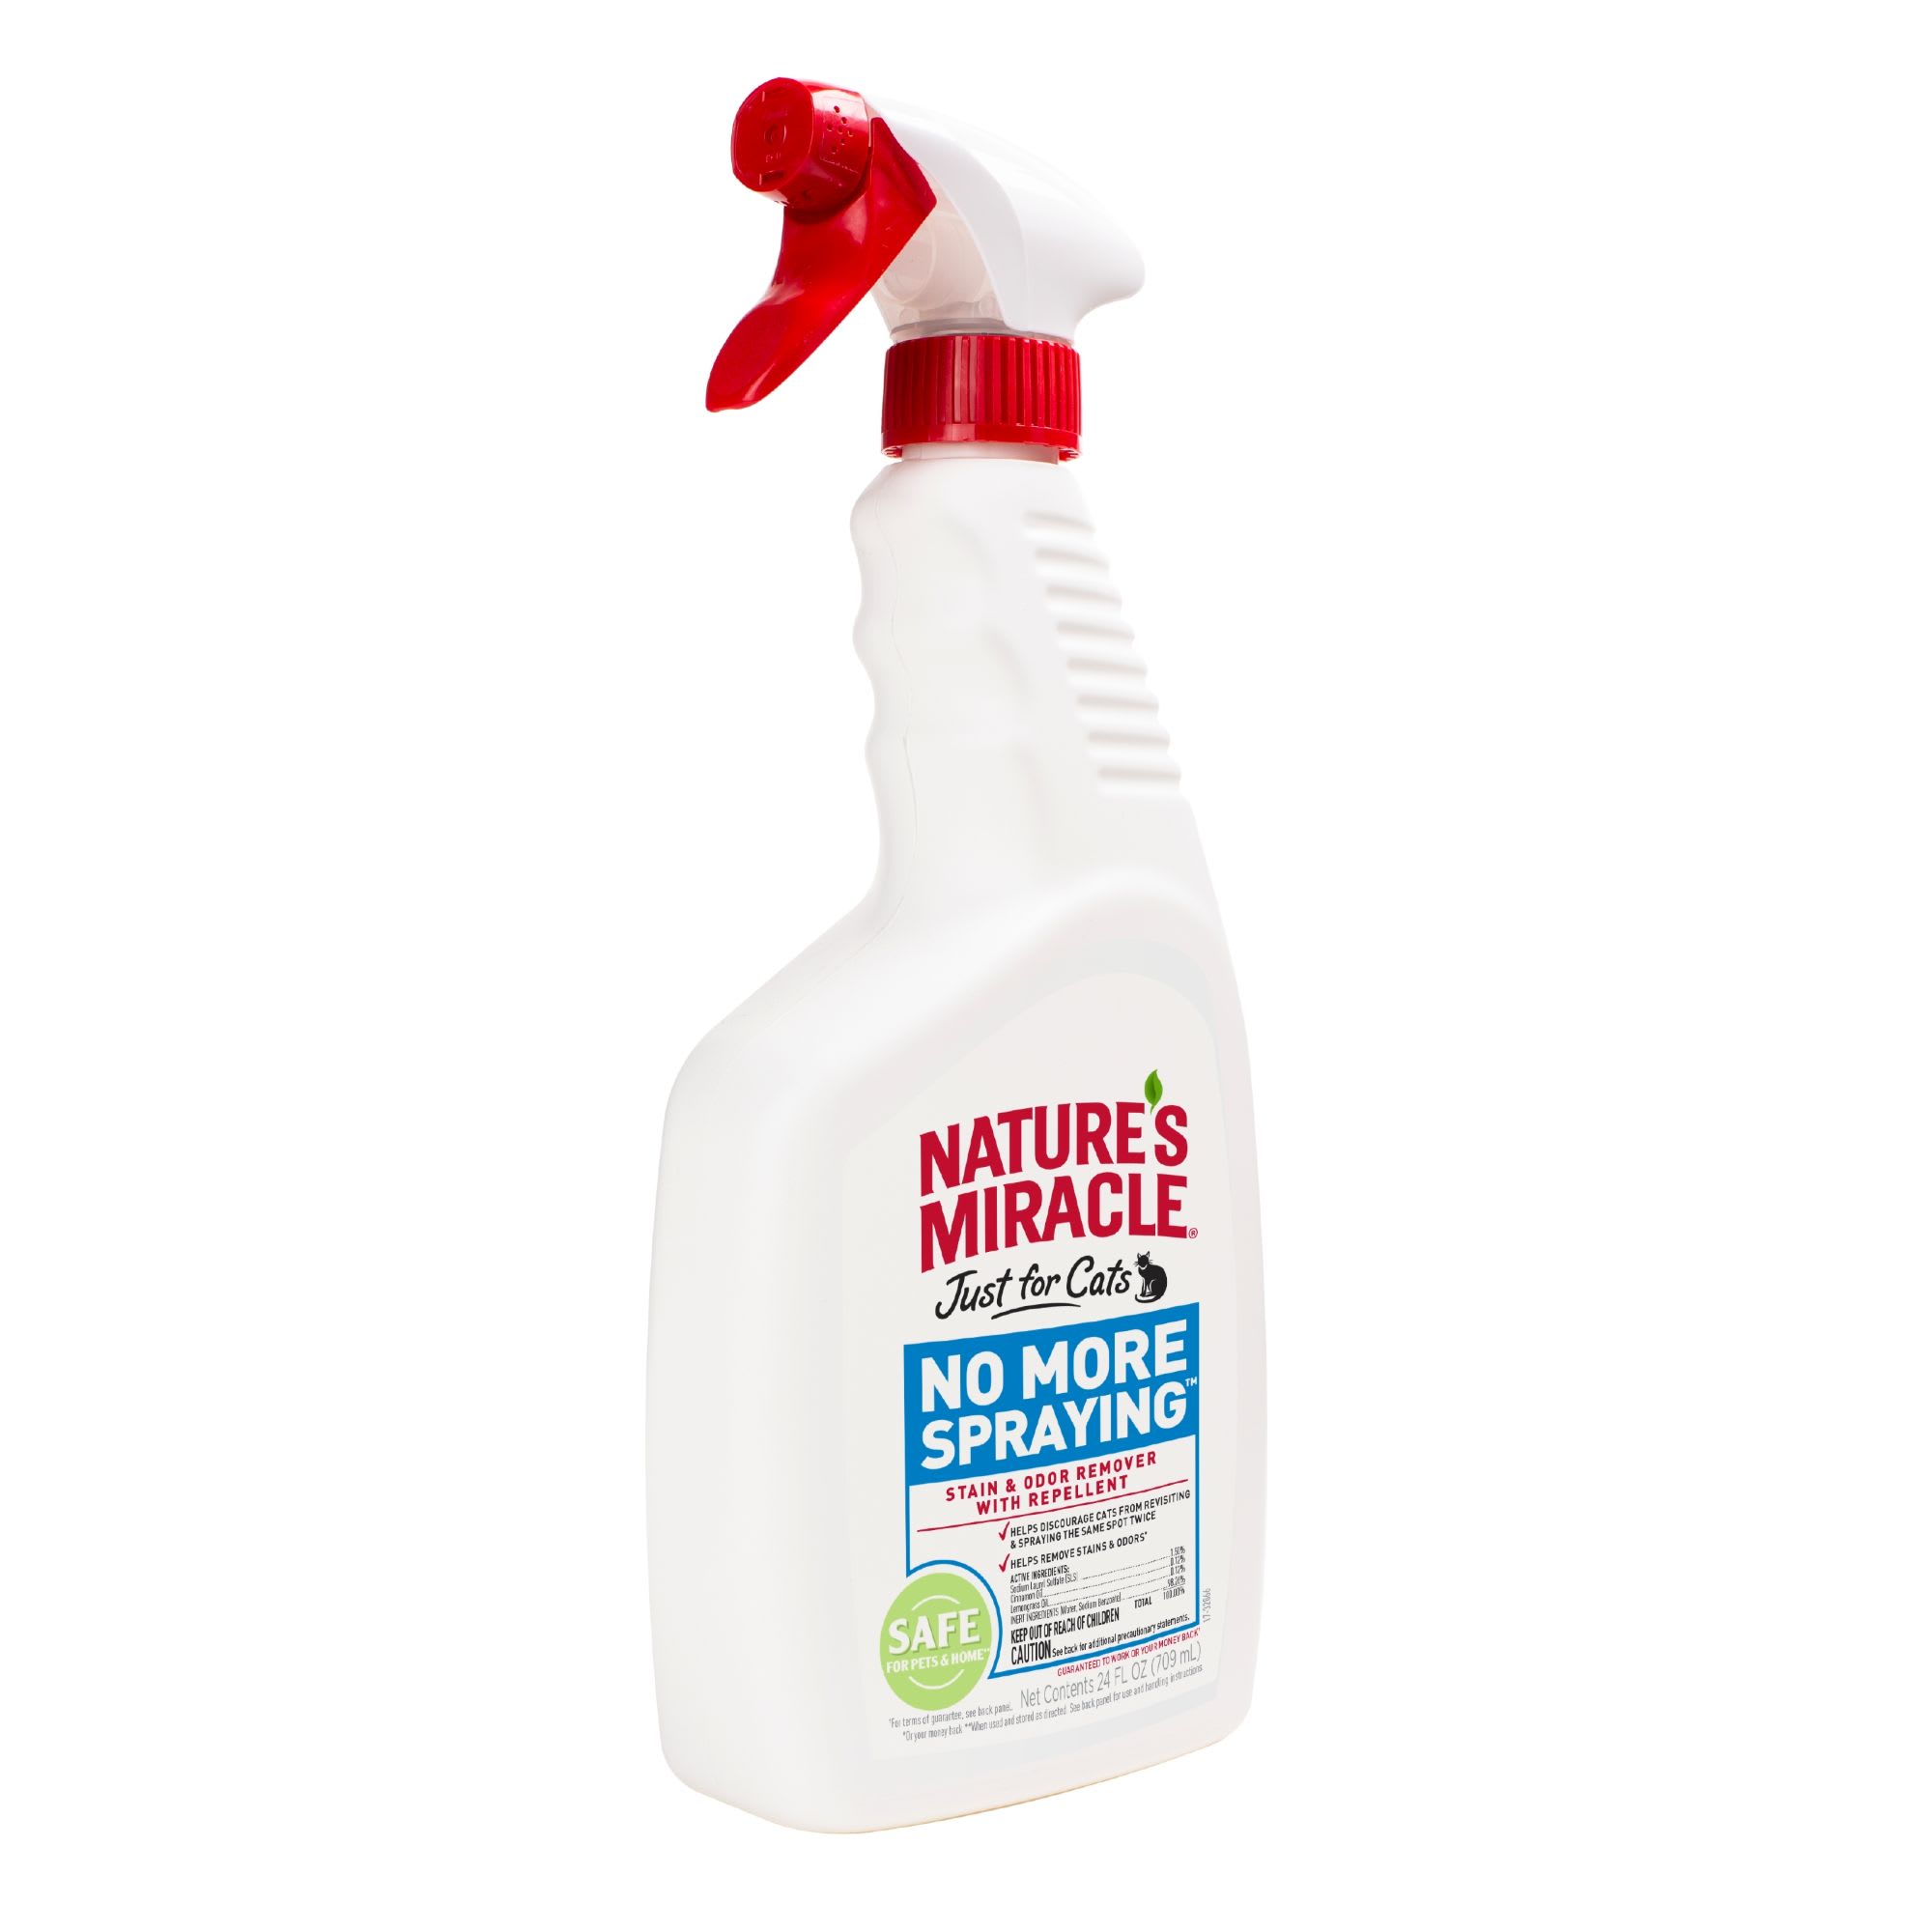 Nature's Miracle No More Spraying Stain and Odor Remover ...